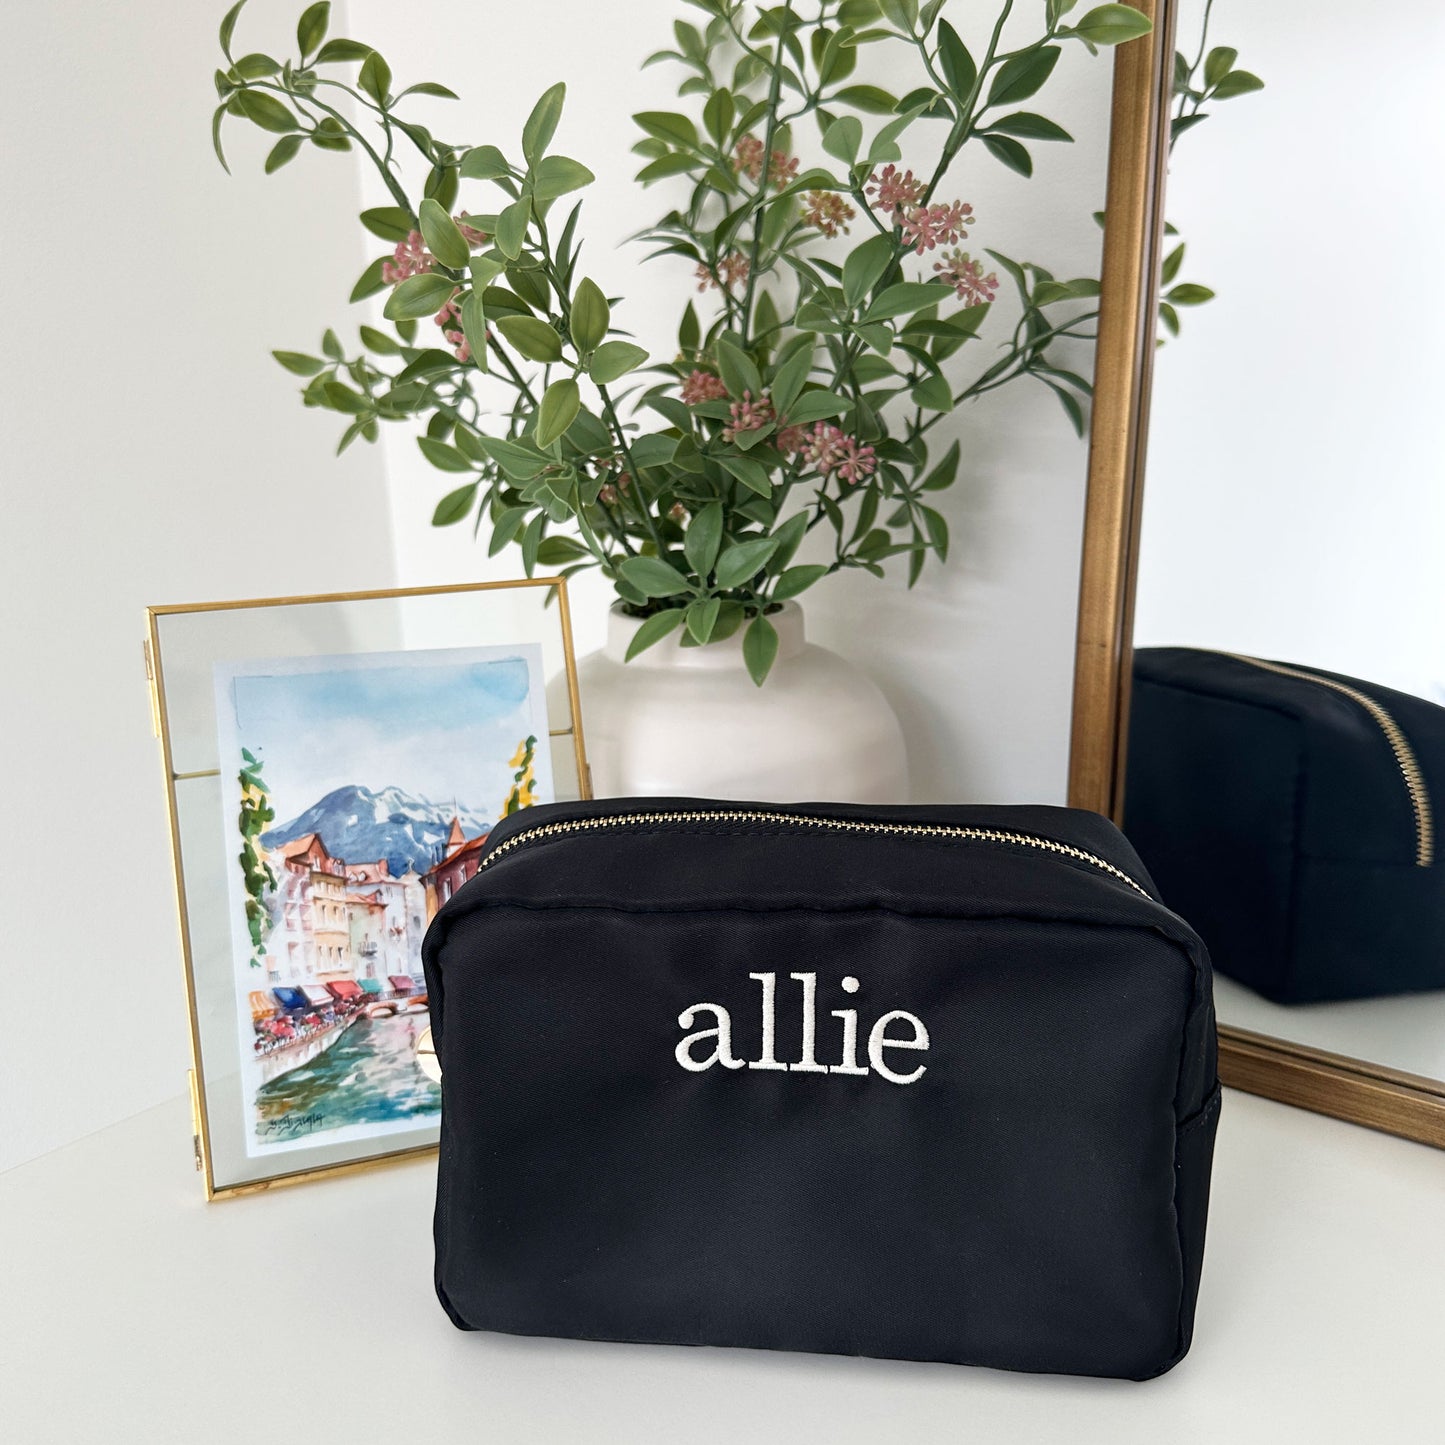 black nylon cosmetic bag with allie embroidered in white